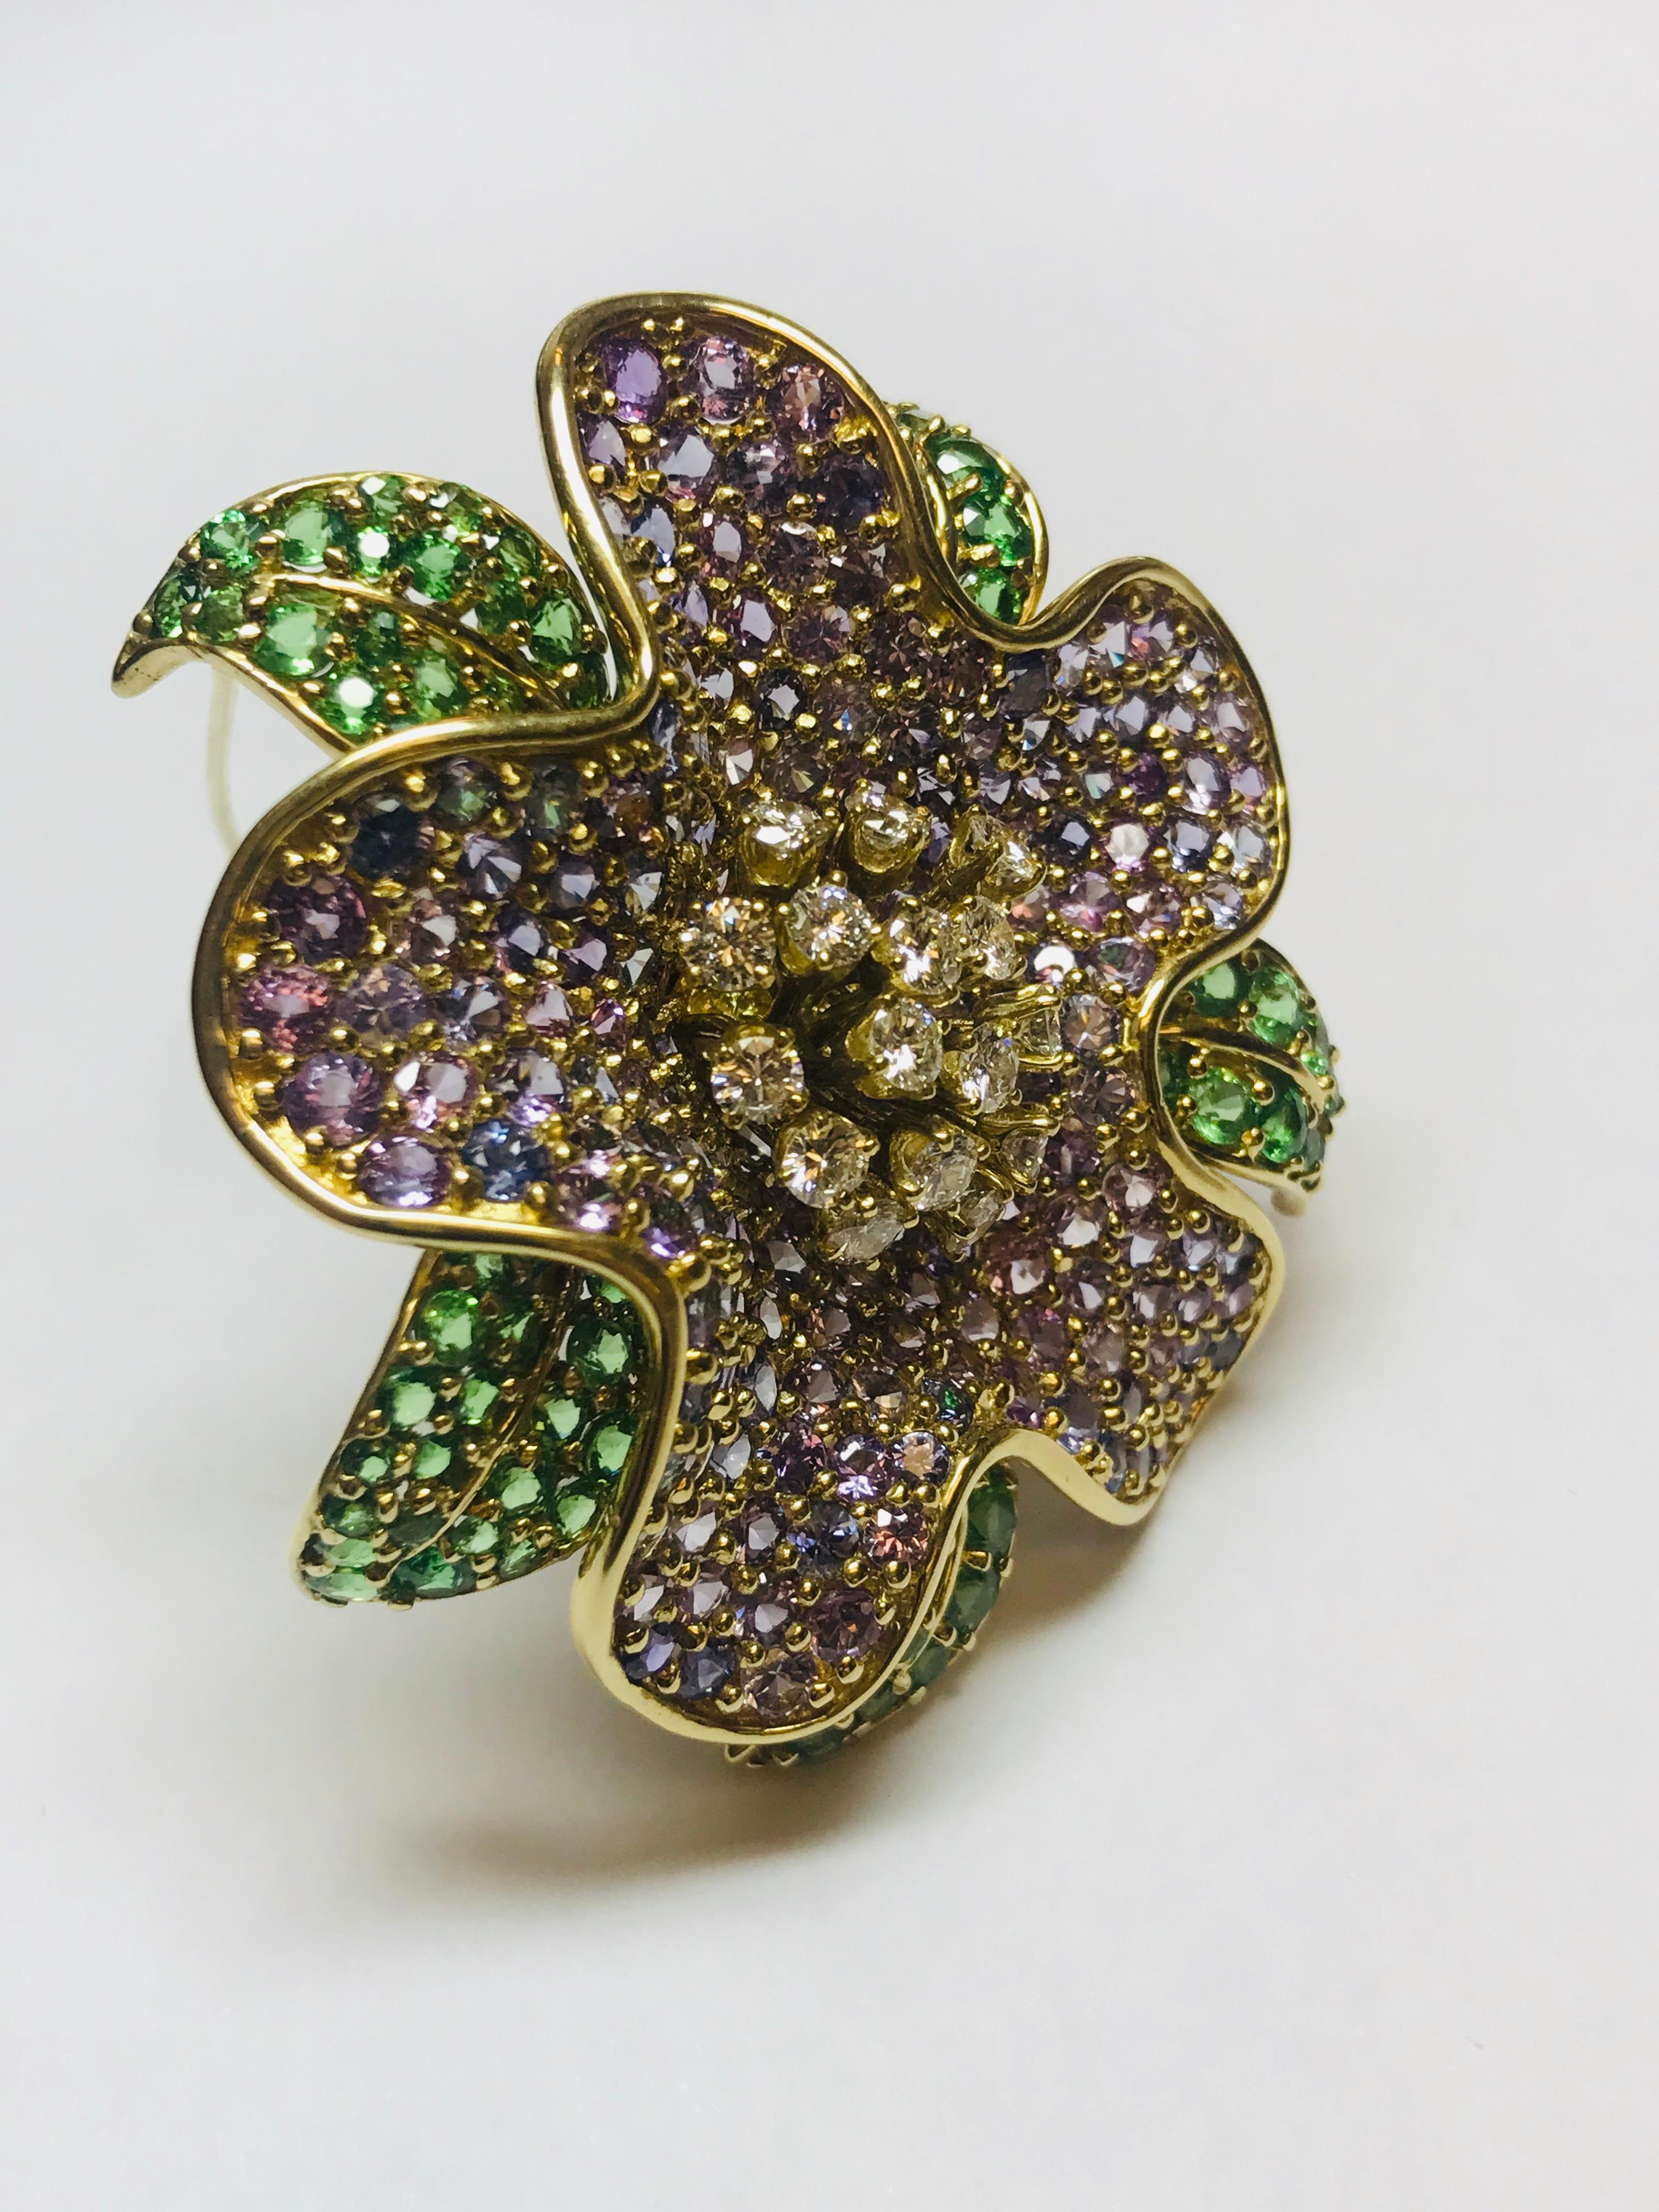 This color combination and craftsmanship of this Rhododendron flower brooch is so incredible. The 20.85 carats of incredible Purple Sapphires with 6.36 carats of richly Green Tsavorite garnets and 1.85 carats of  G+ color VVS clarity diamonds works